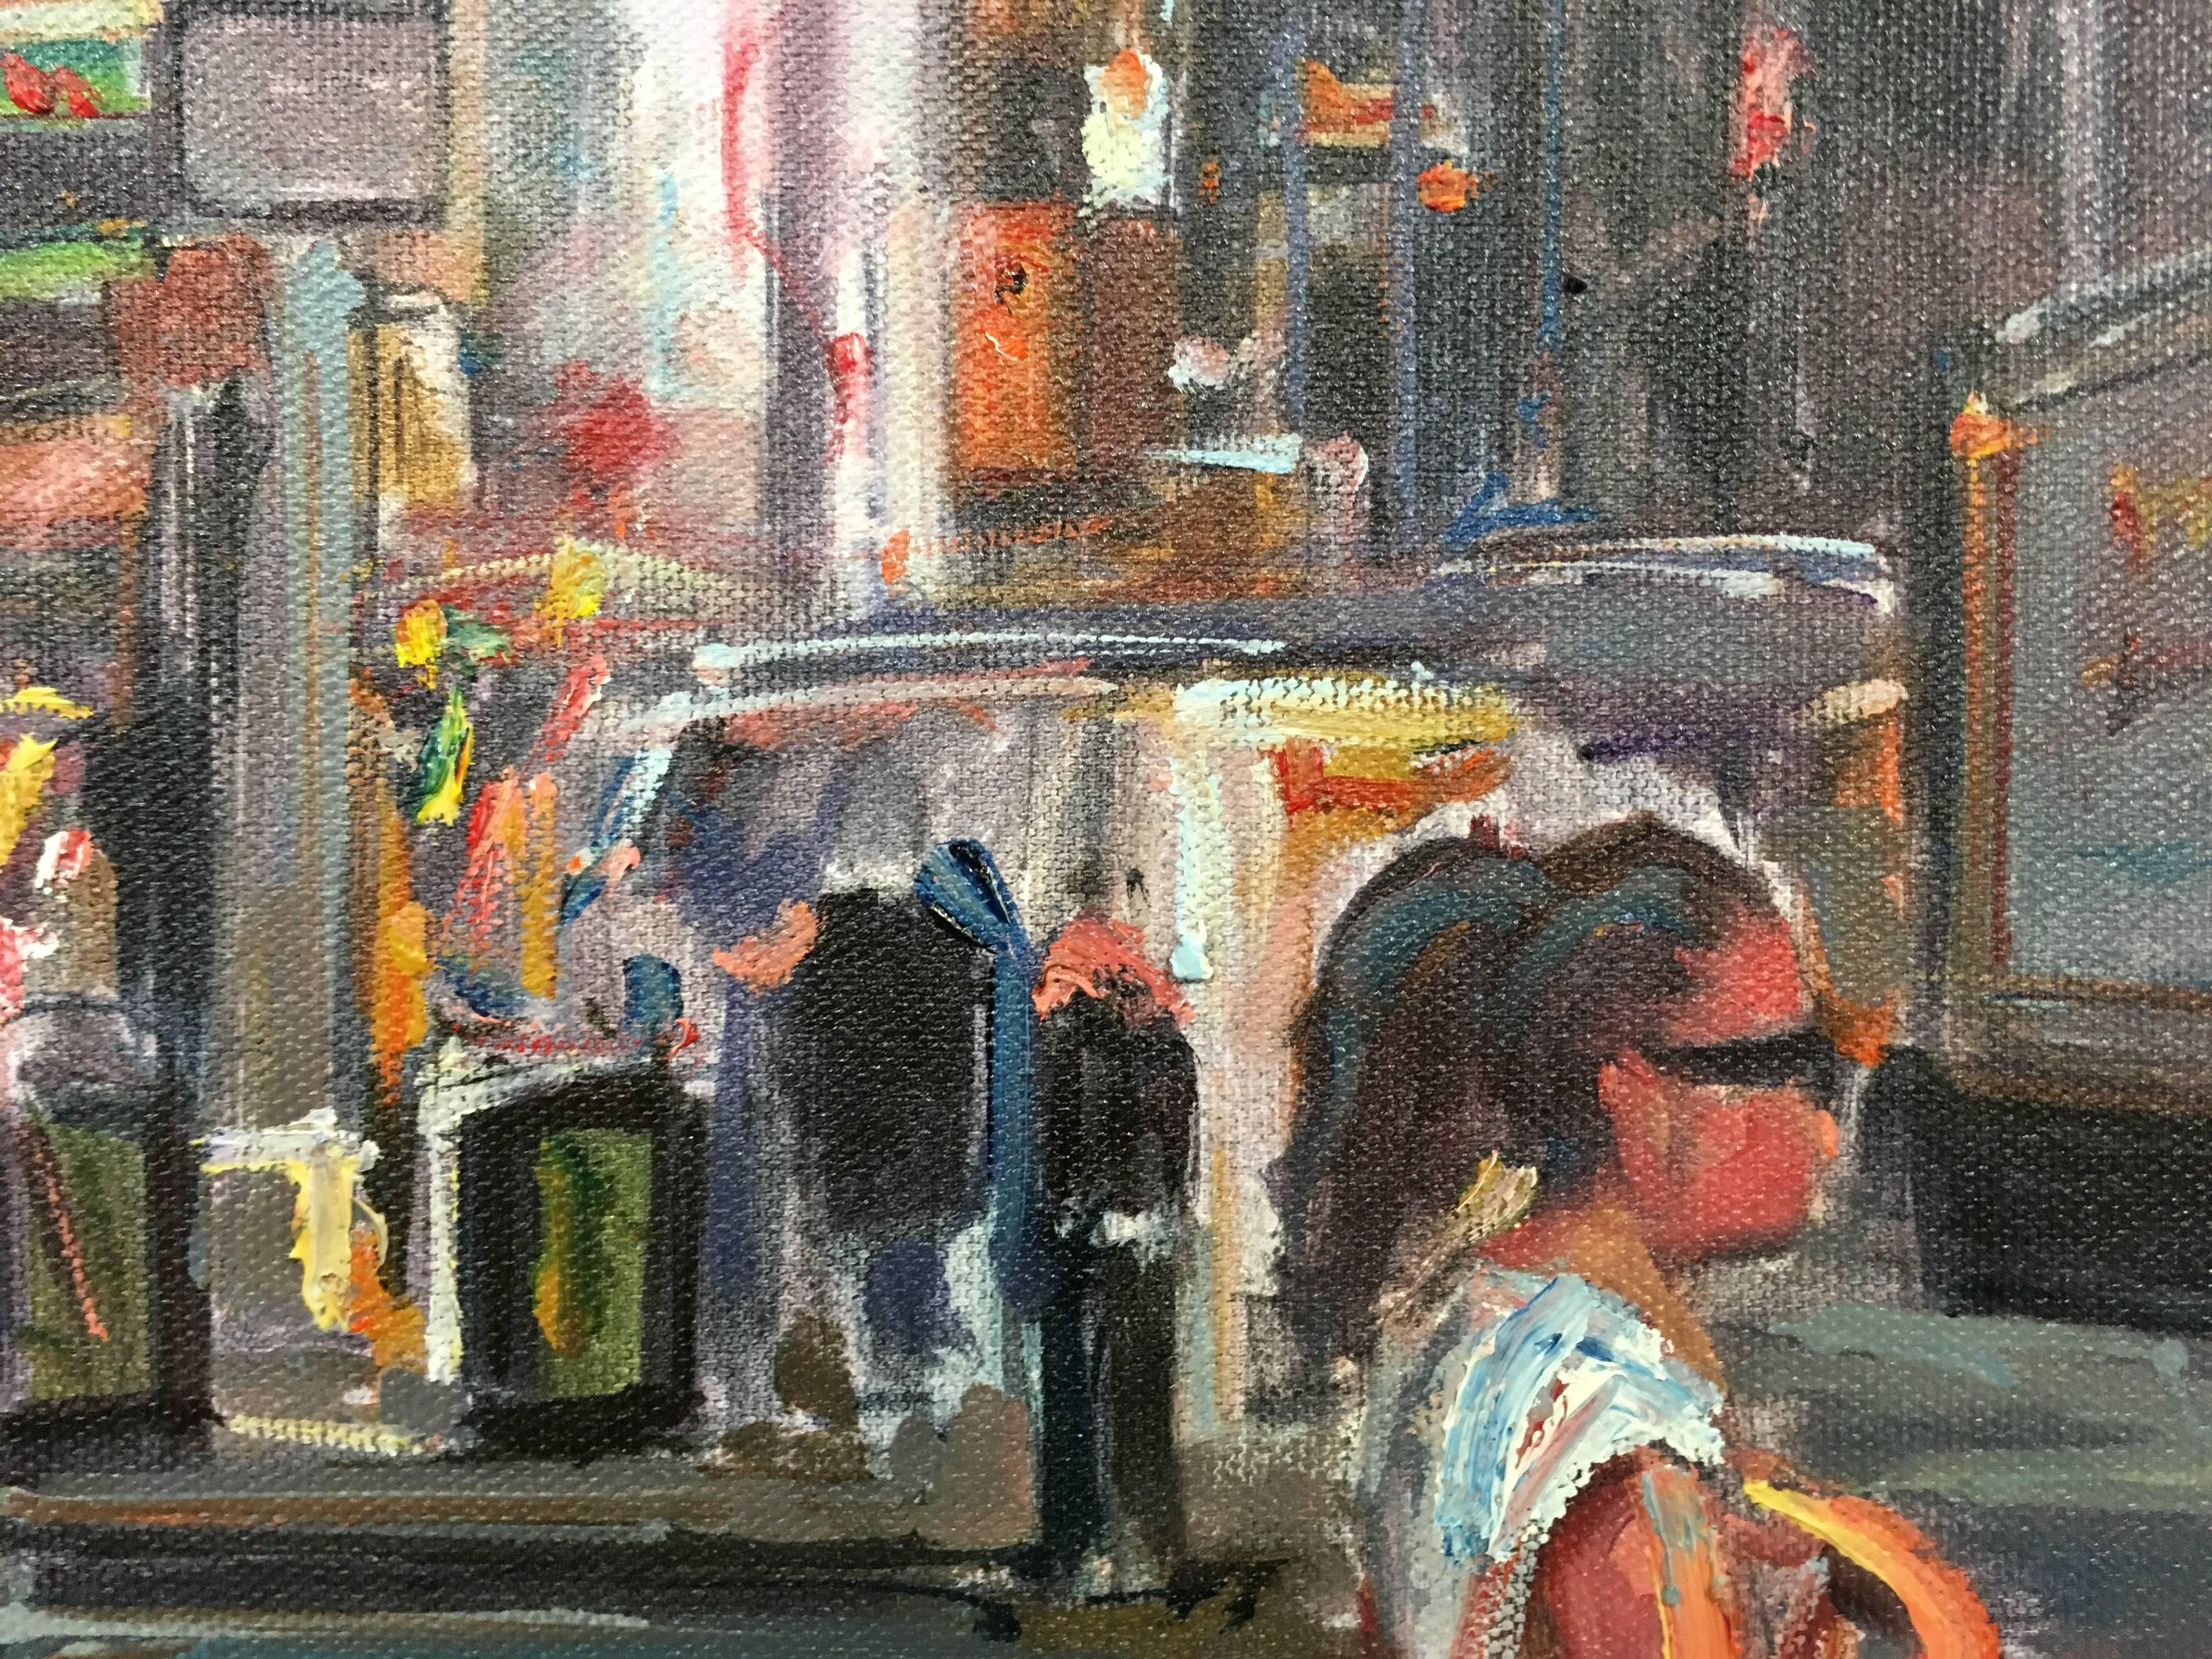 New York II - Painting by Ernesto Torres